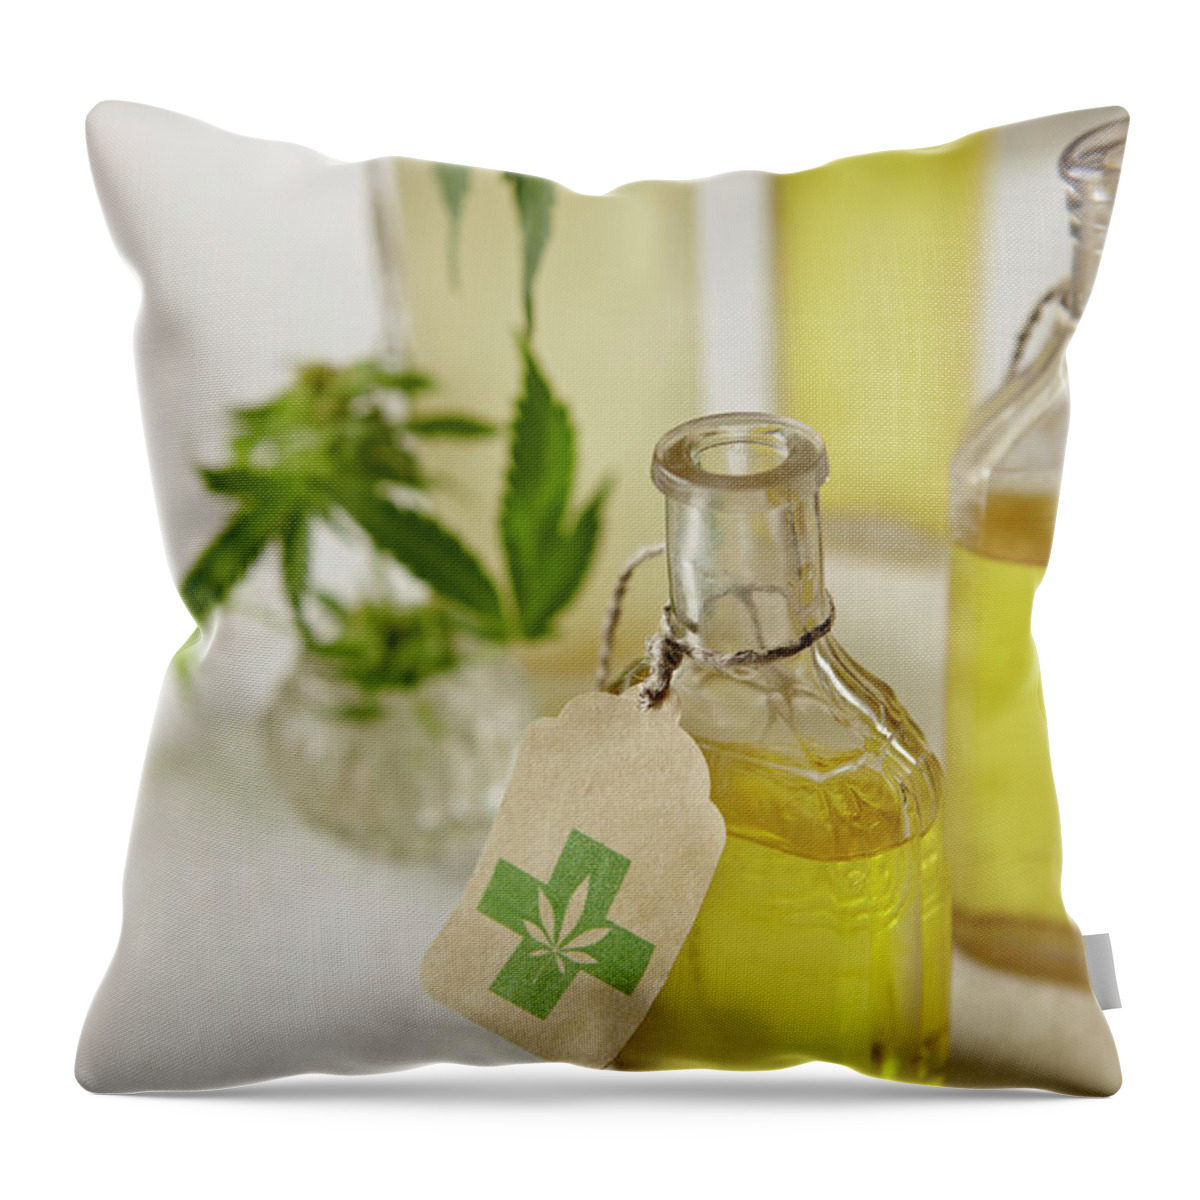 Social Issues Throw Pillow featuring the photograph Oil Infused With Marijuana by Lew Robertson